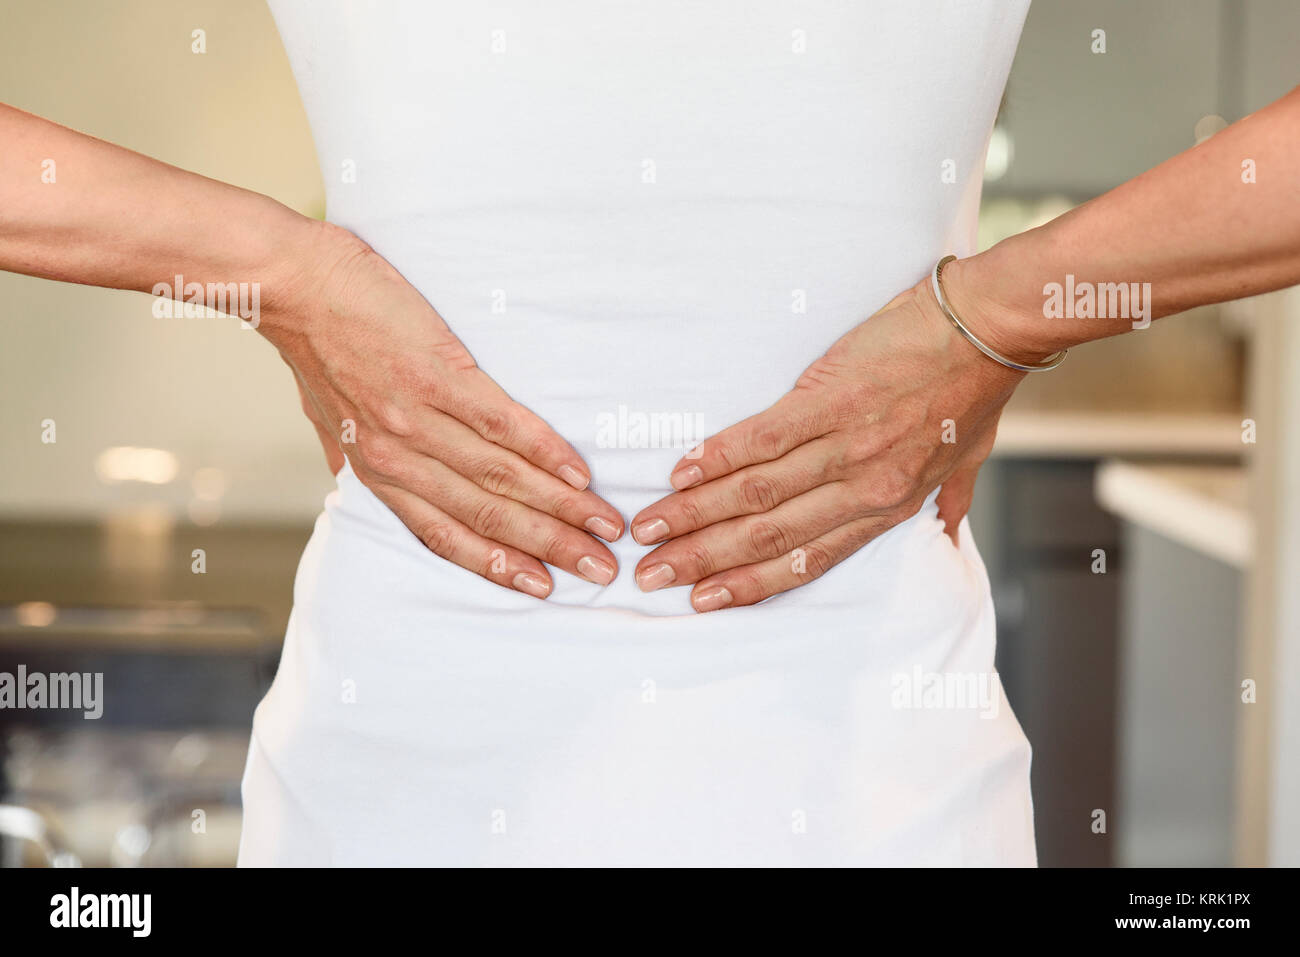 Hands of mixed race woman rubbing lower back Stock Photo